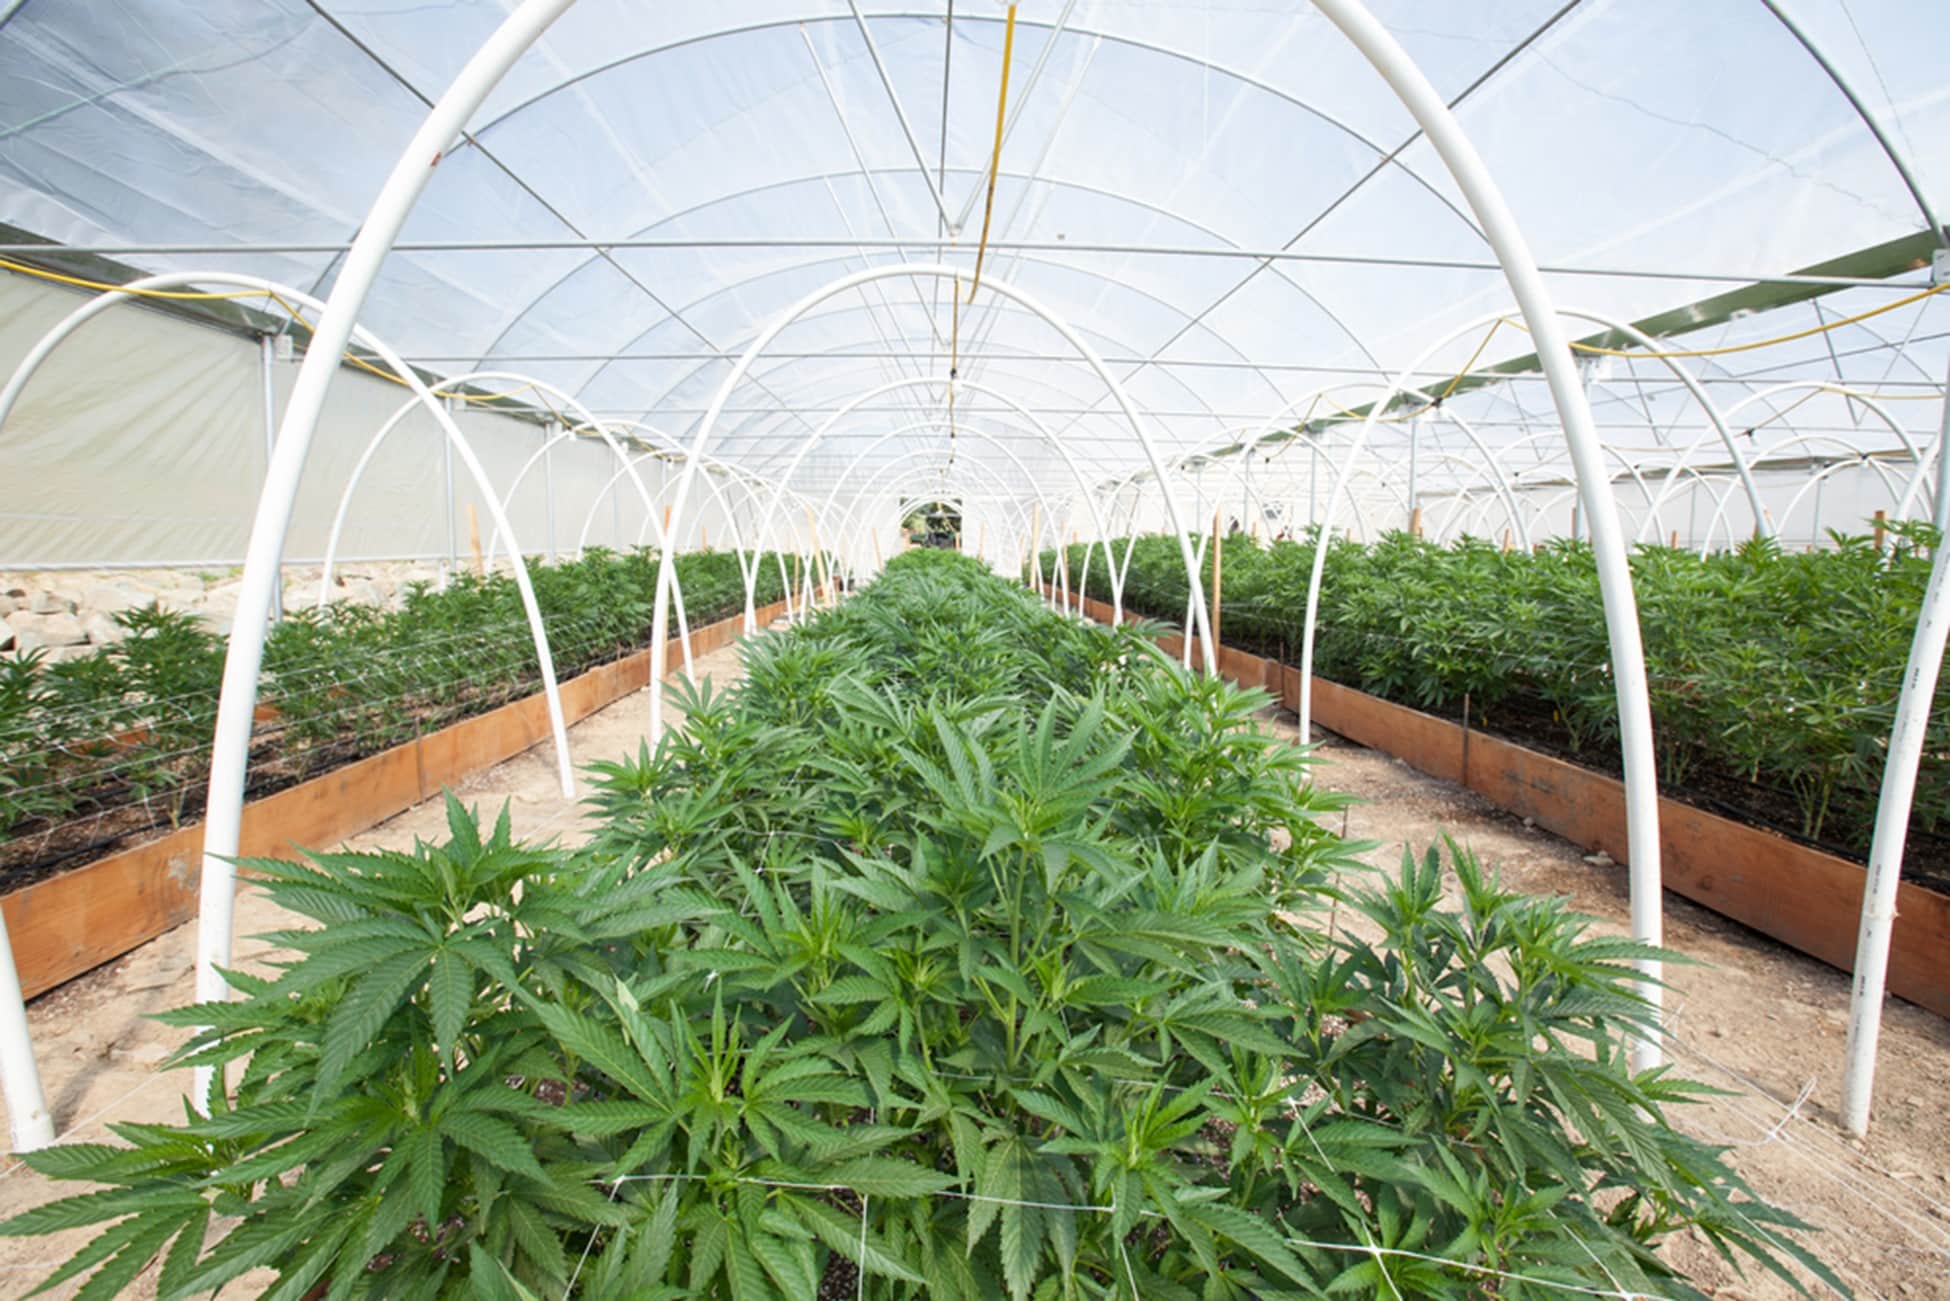 a greenhouse full of cannabis plants in rows with hoop bars for plant stability